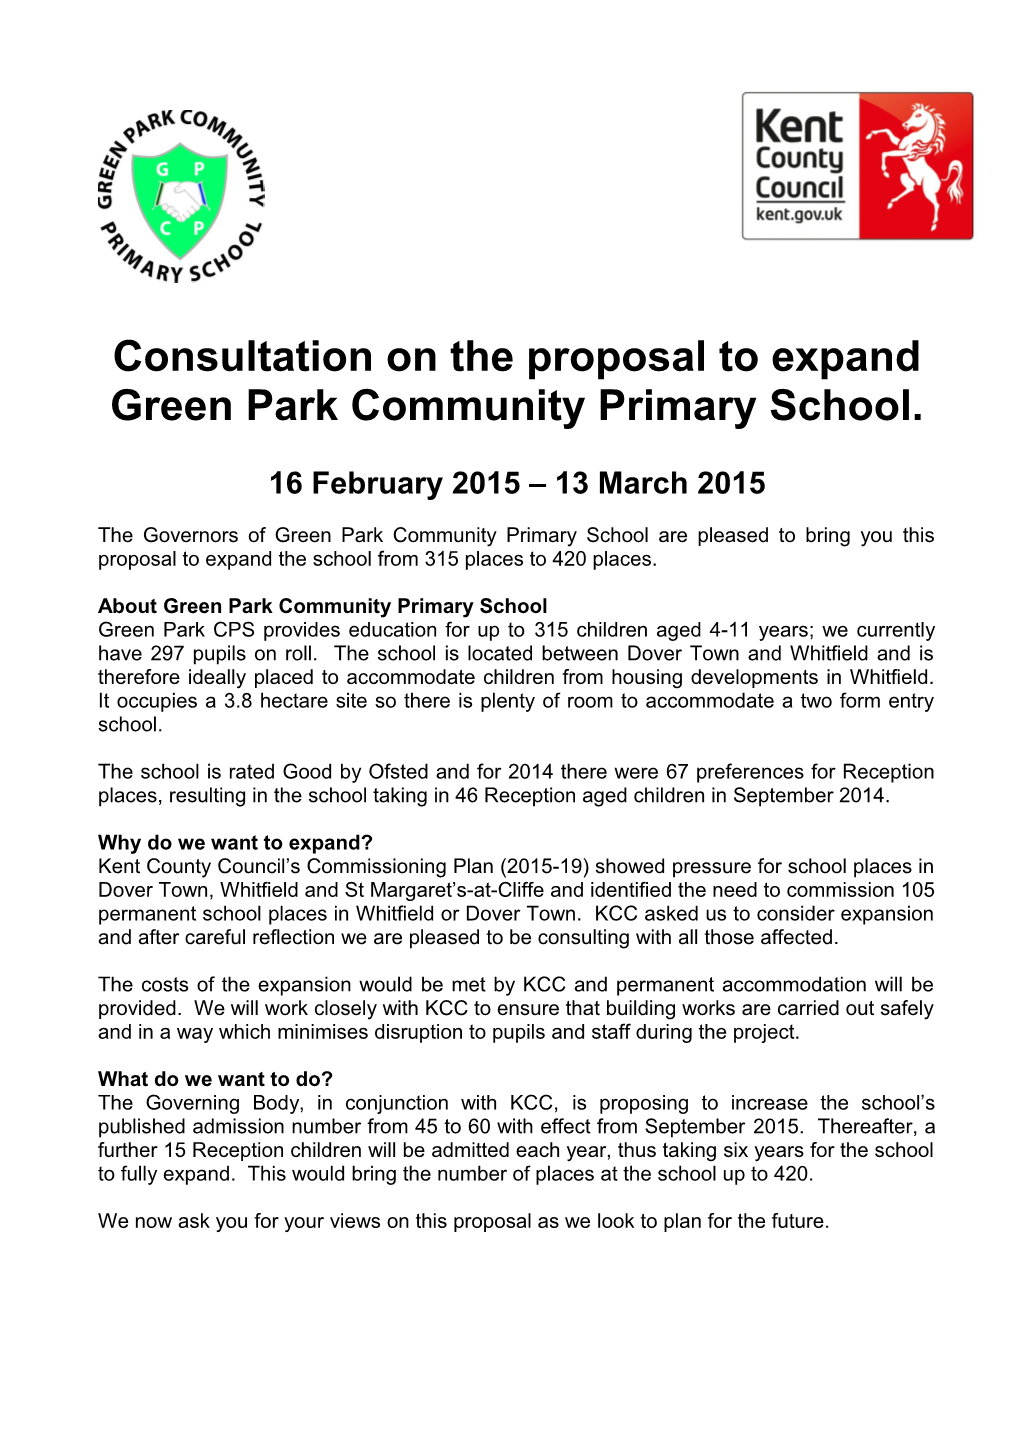 Consultation on the Proposal to Expand St John S CE Primary Academy, Maidstone